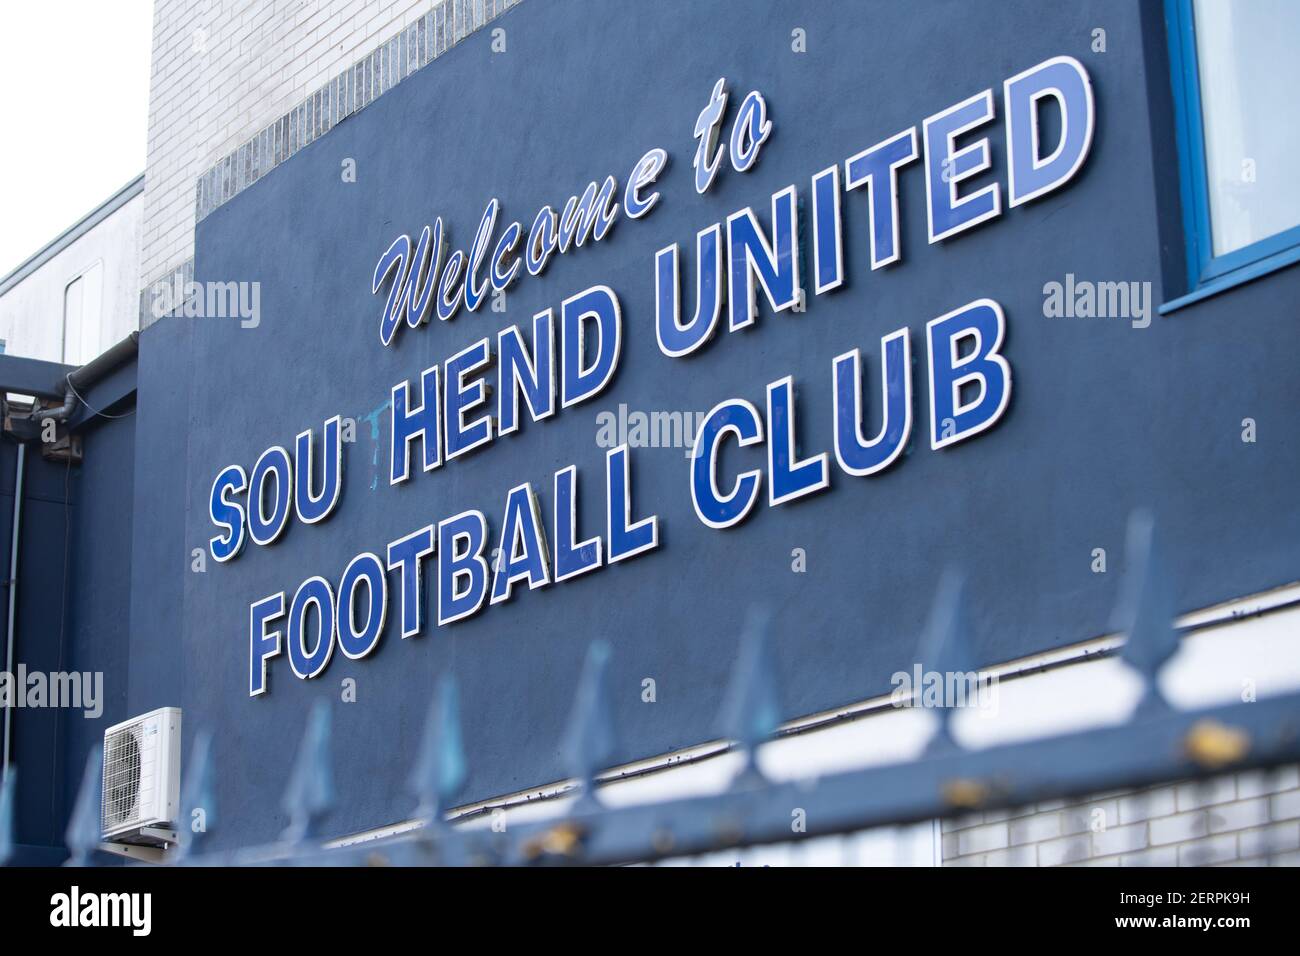 Roots Hall, Southend United Football Club. Stockfoto